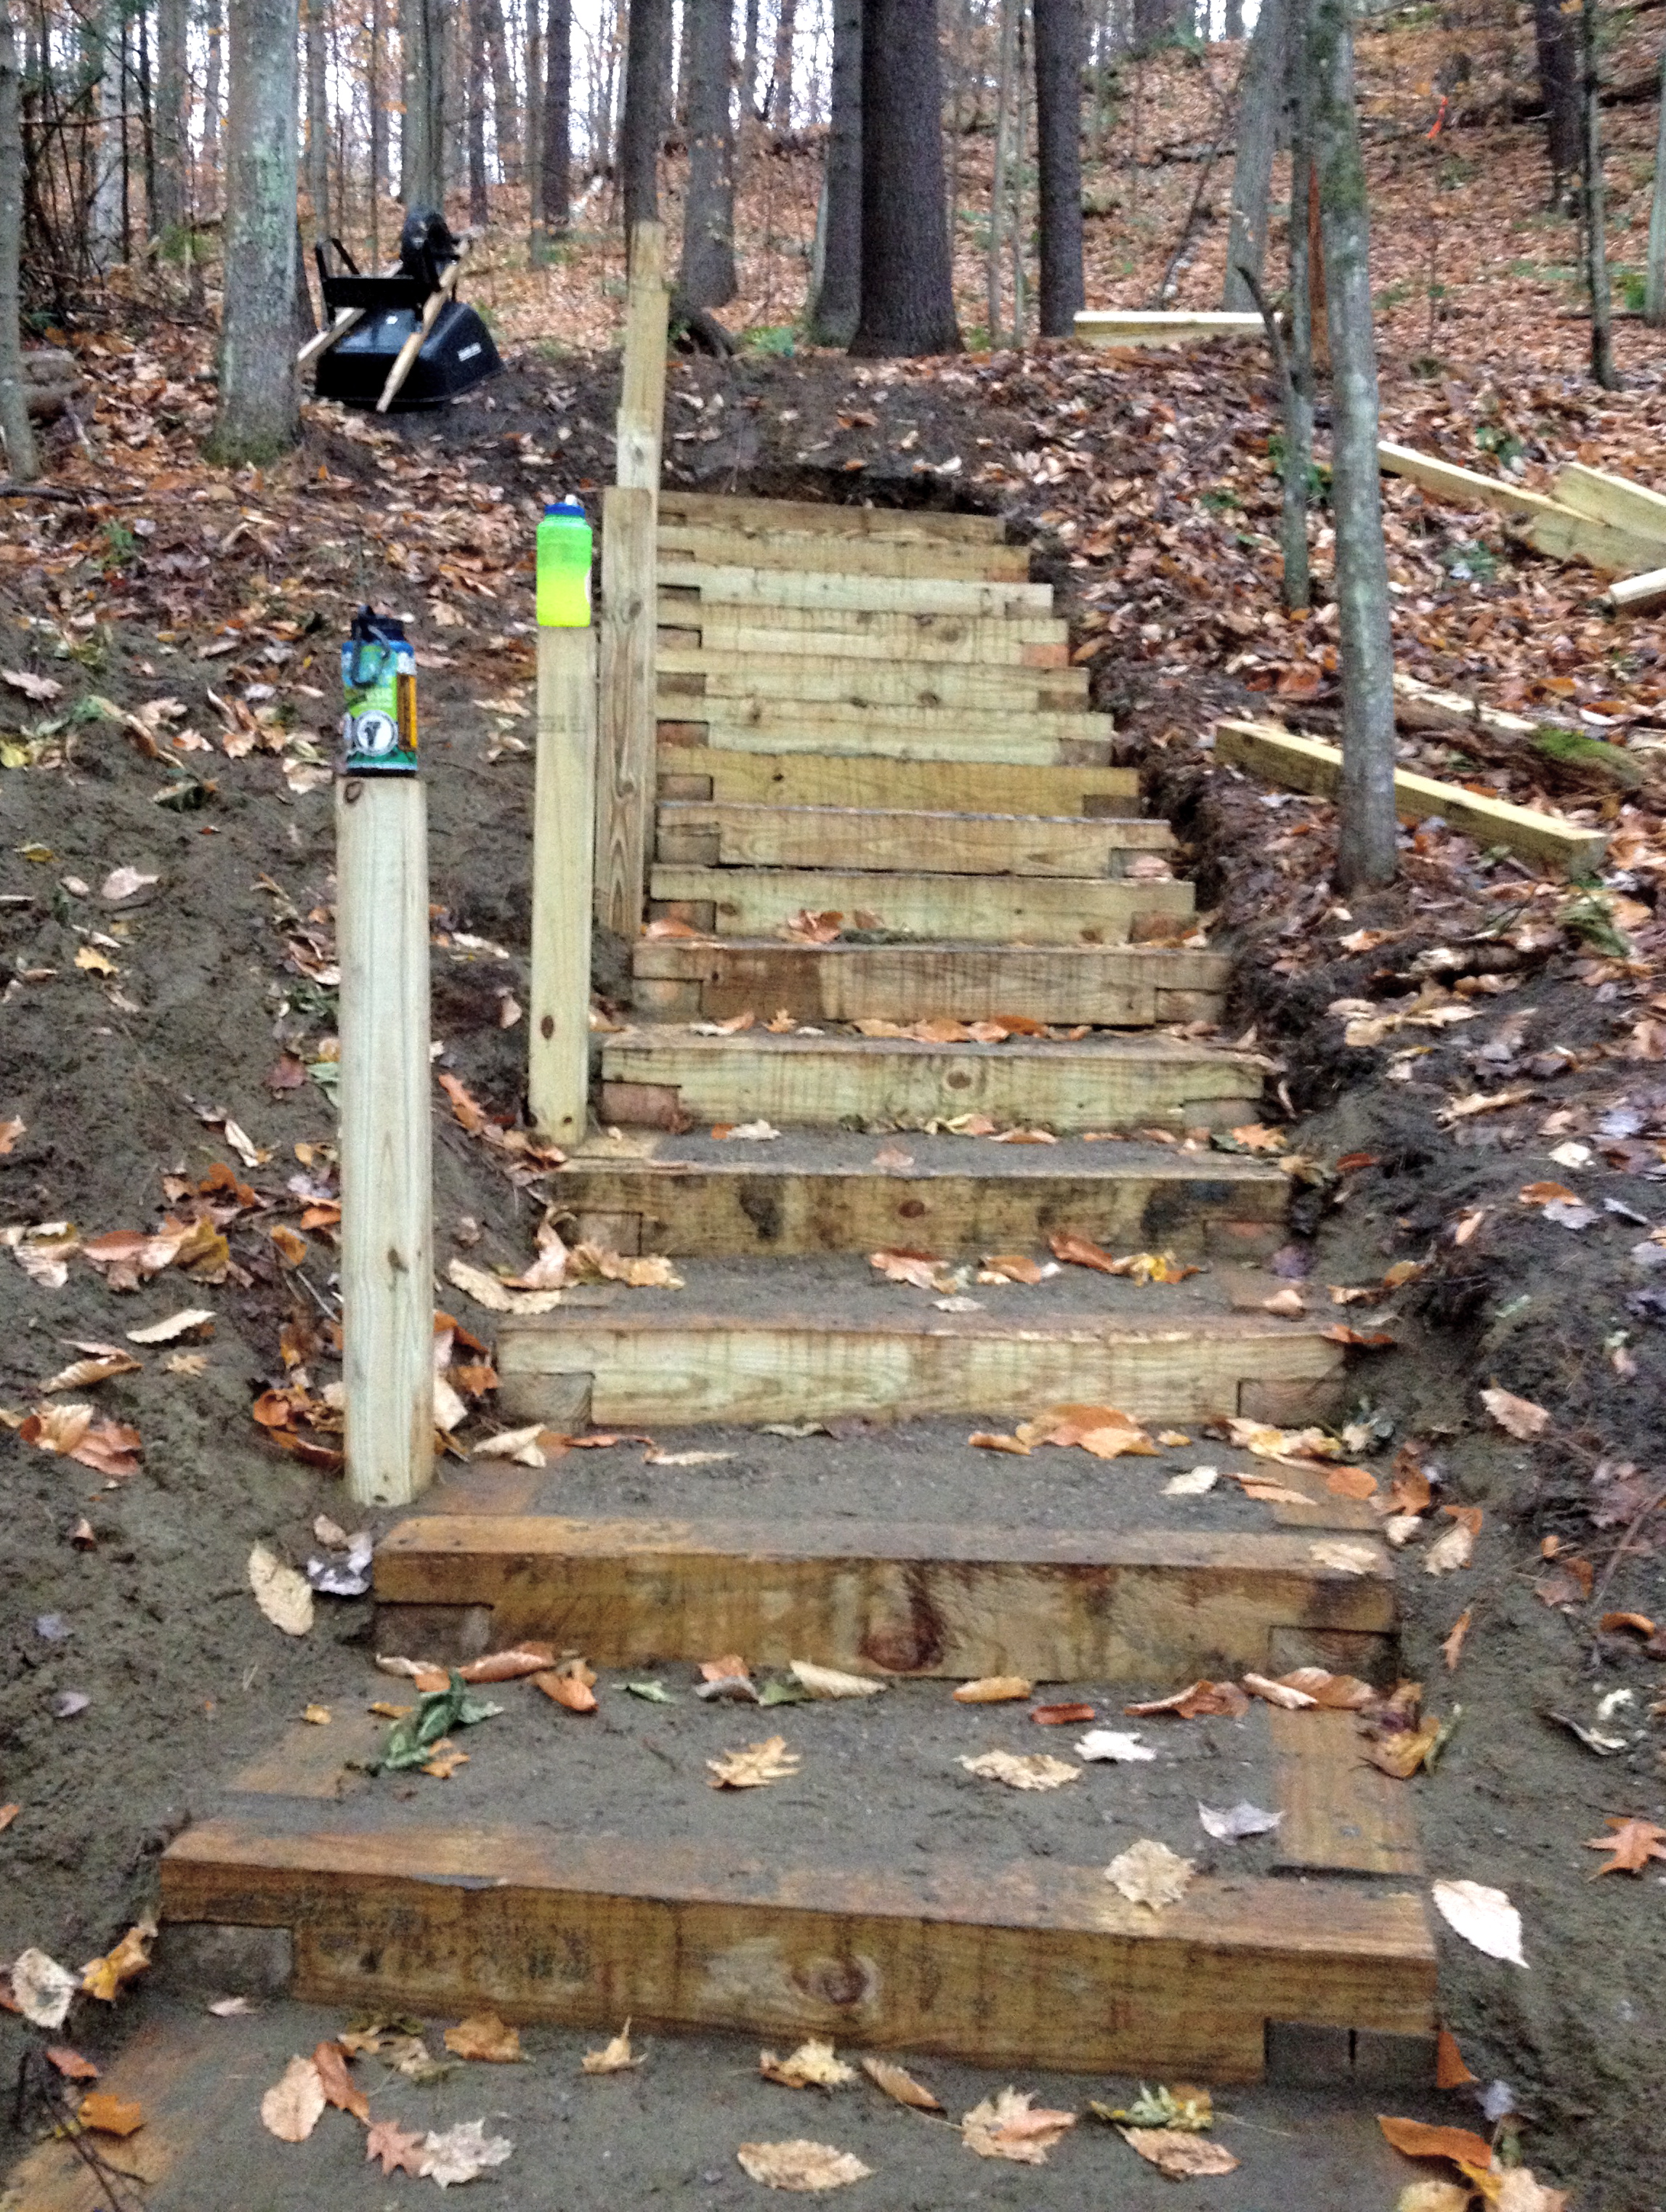  Over 80 crib steps at Niquette Bay State Park in Vermont.&nbsp; 